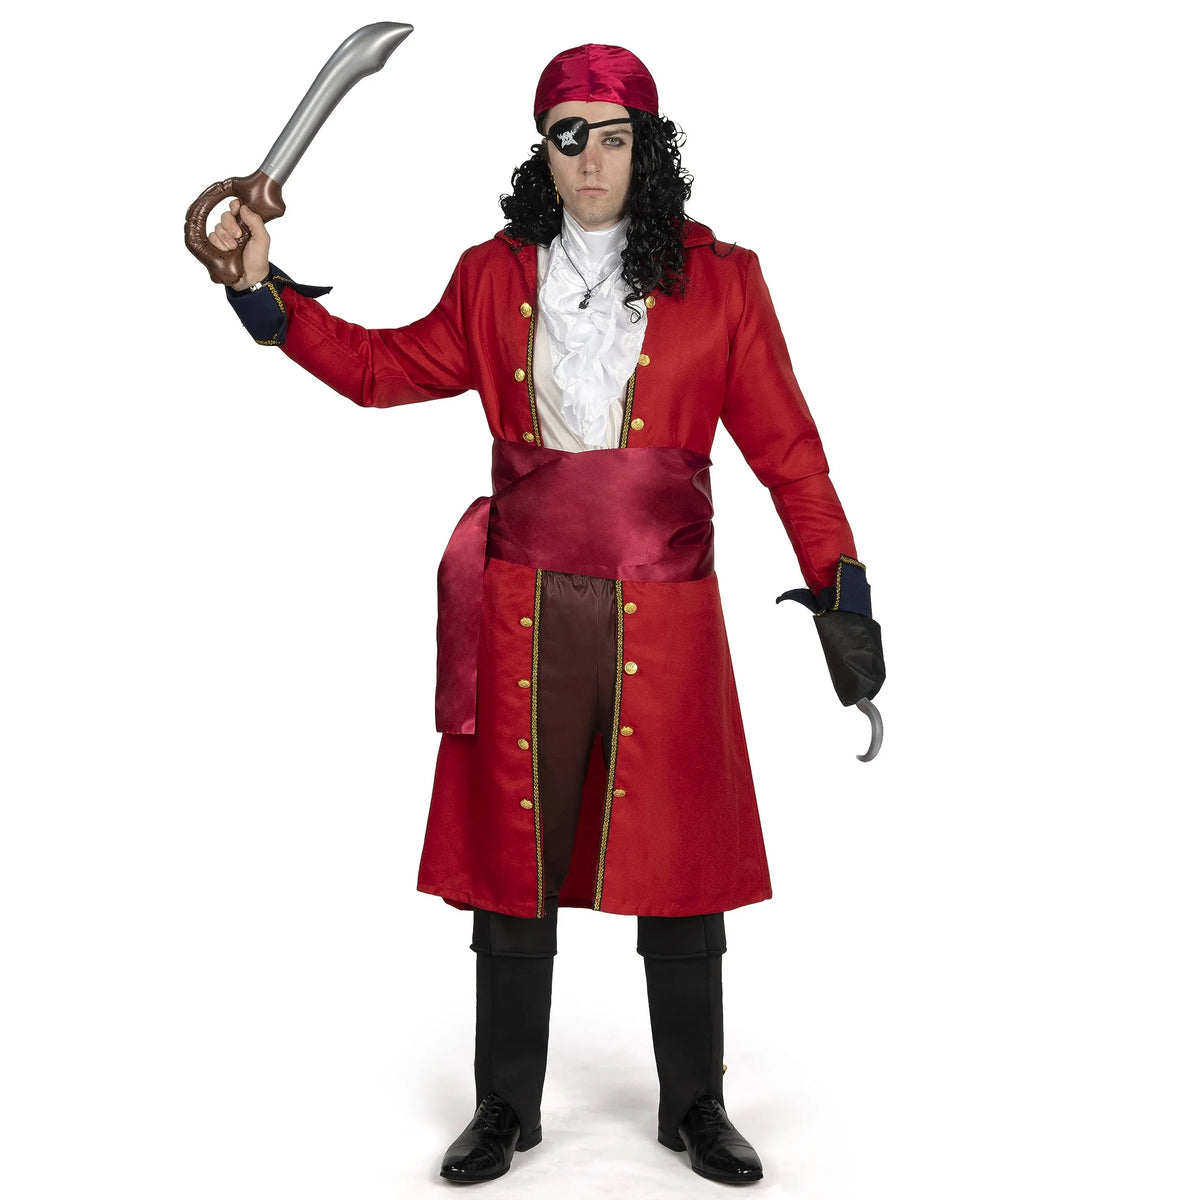 Skeleteen Pirate Captain Gold Hook - Toy Pirates Costume